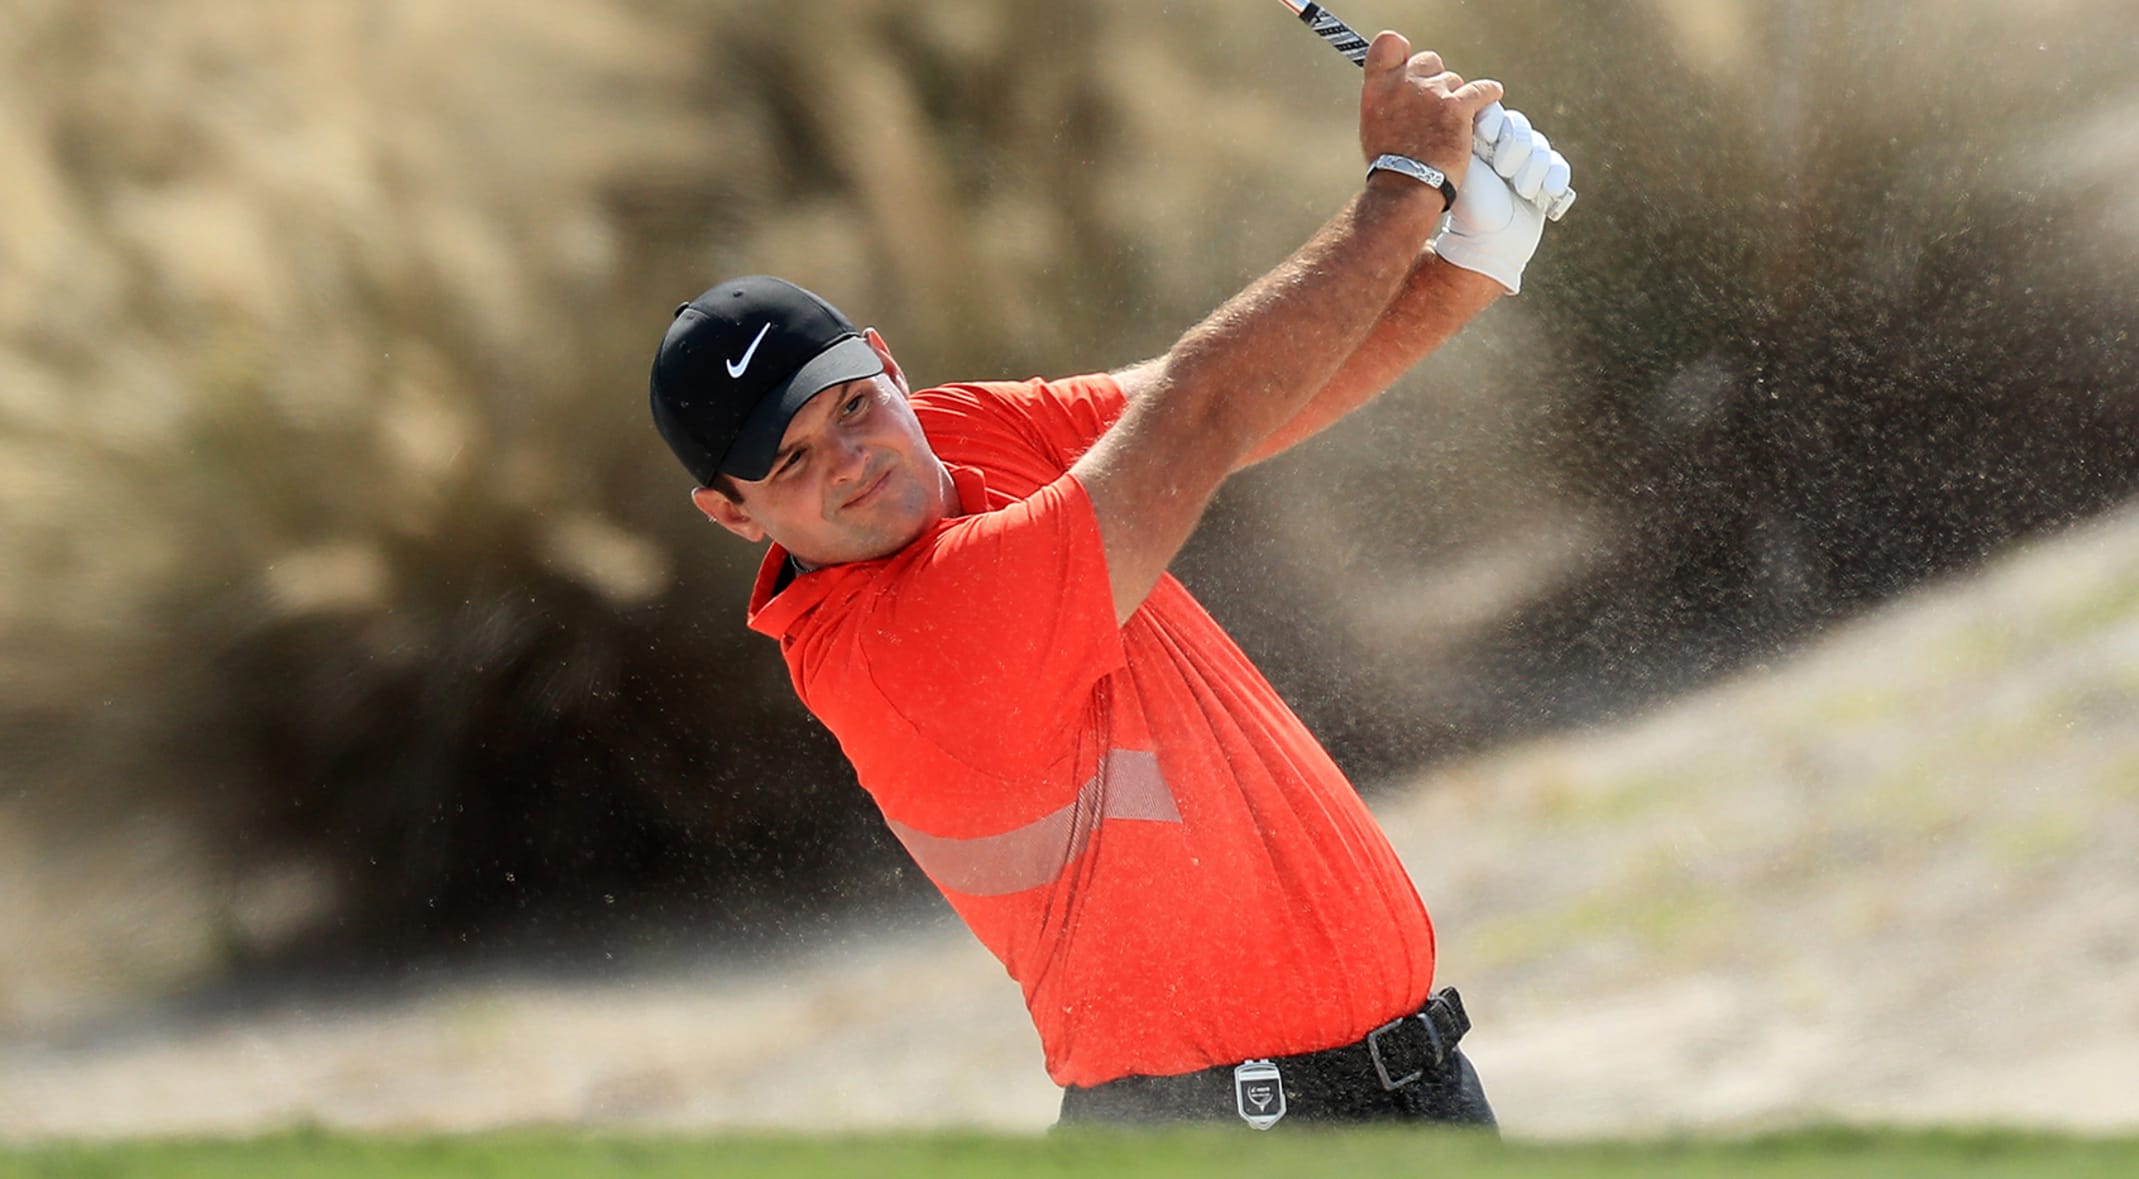 Reed Leads Hero World Challenge After Second Round 66